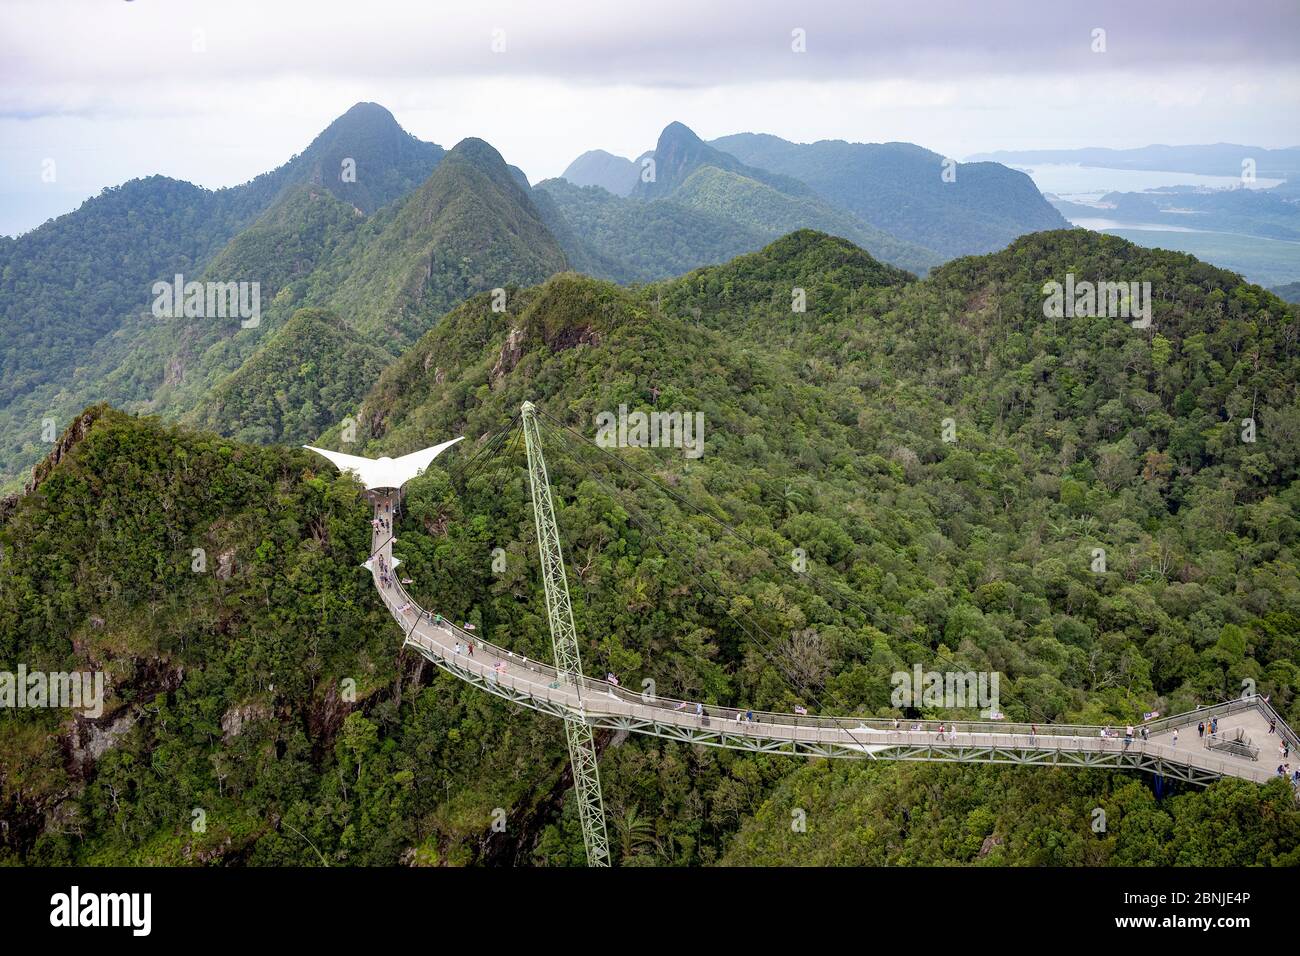 The Langkawi Sky Bridge, a 125 metre curved footbridge high above the rainforest canopy, Langkawi, Malaysia, Southeast Asia, Asia Stock Photo